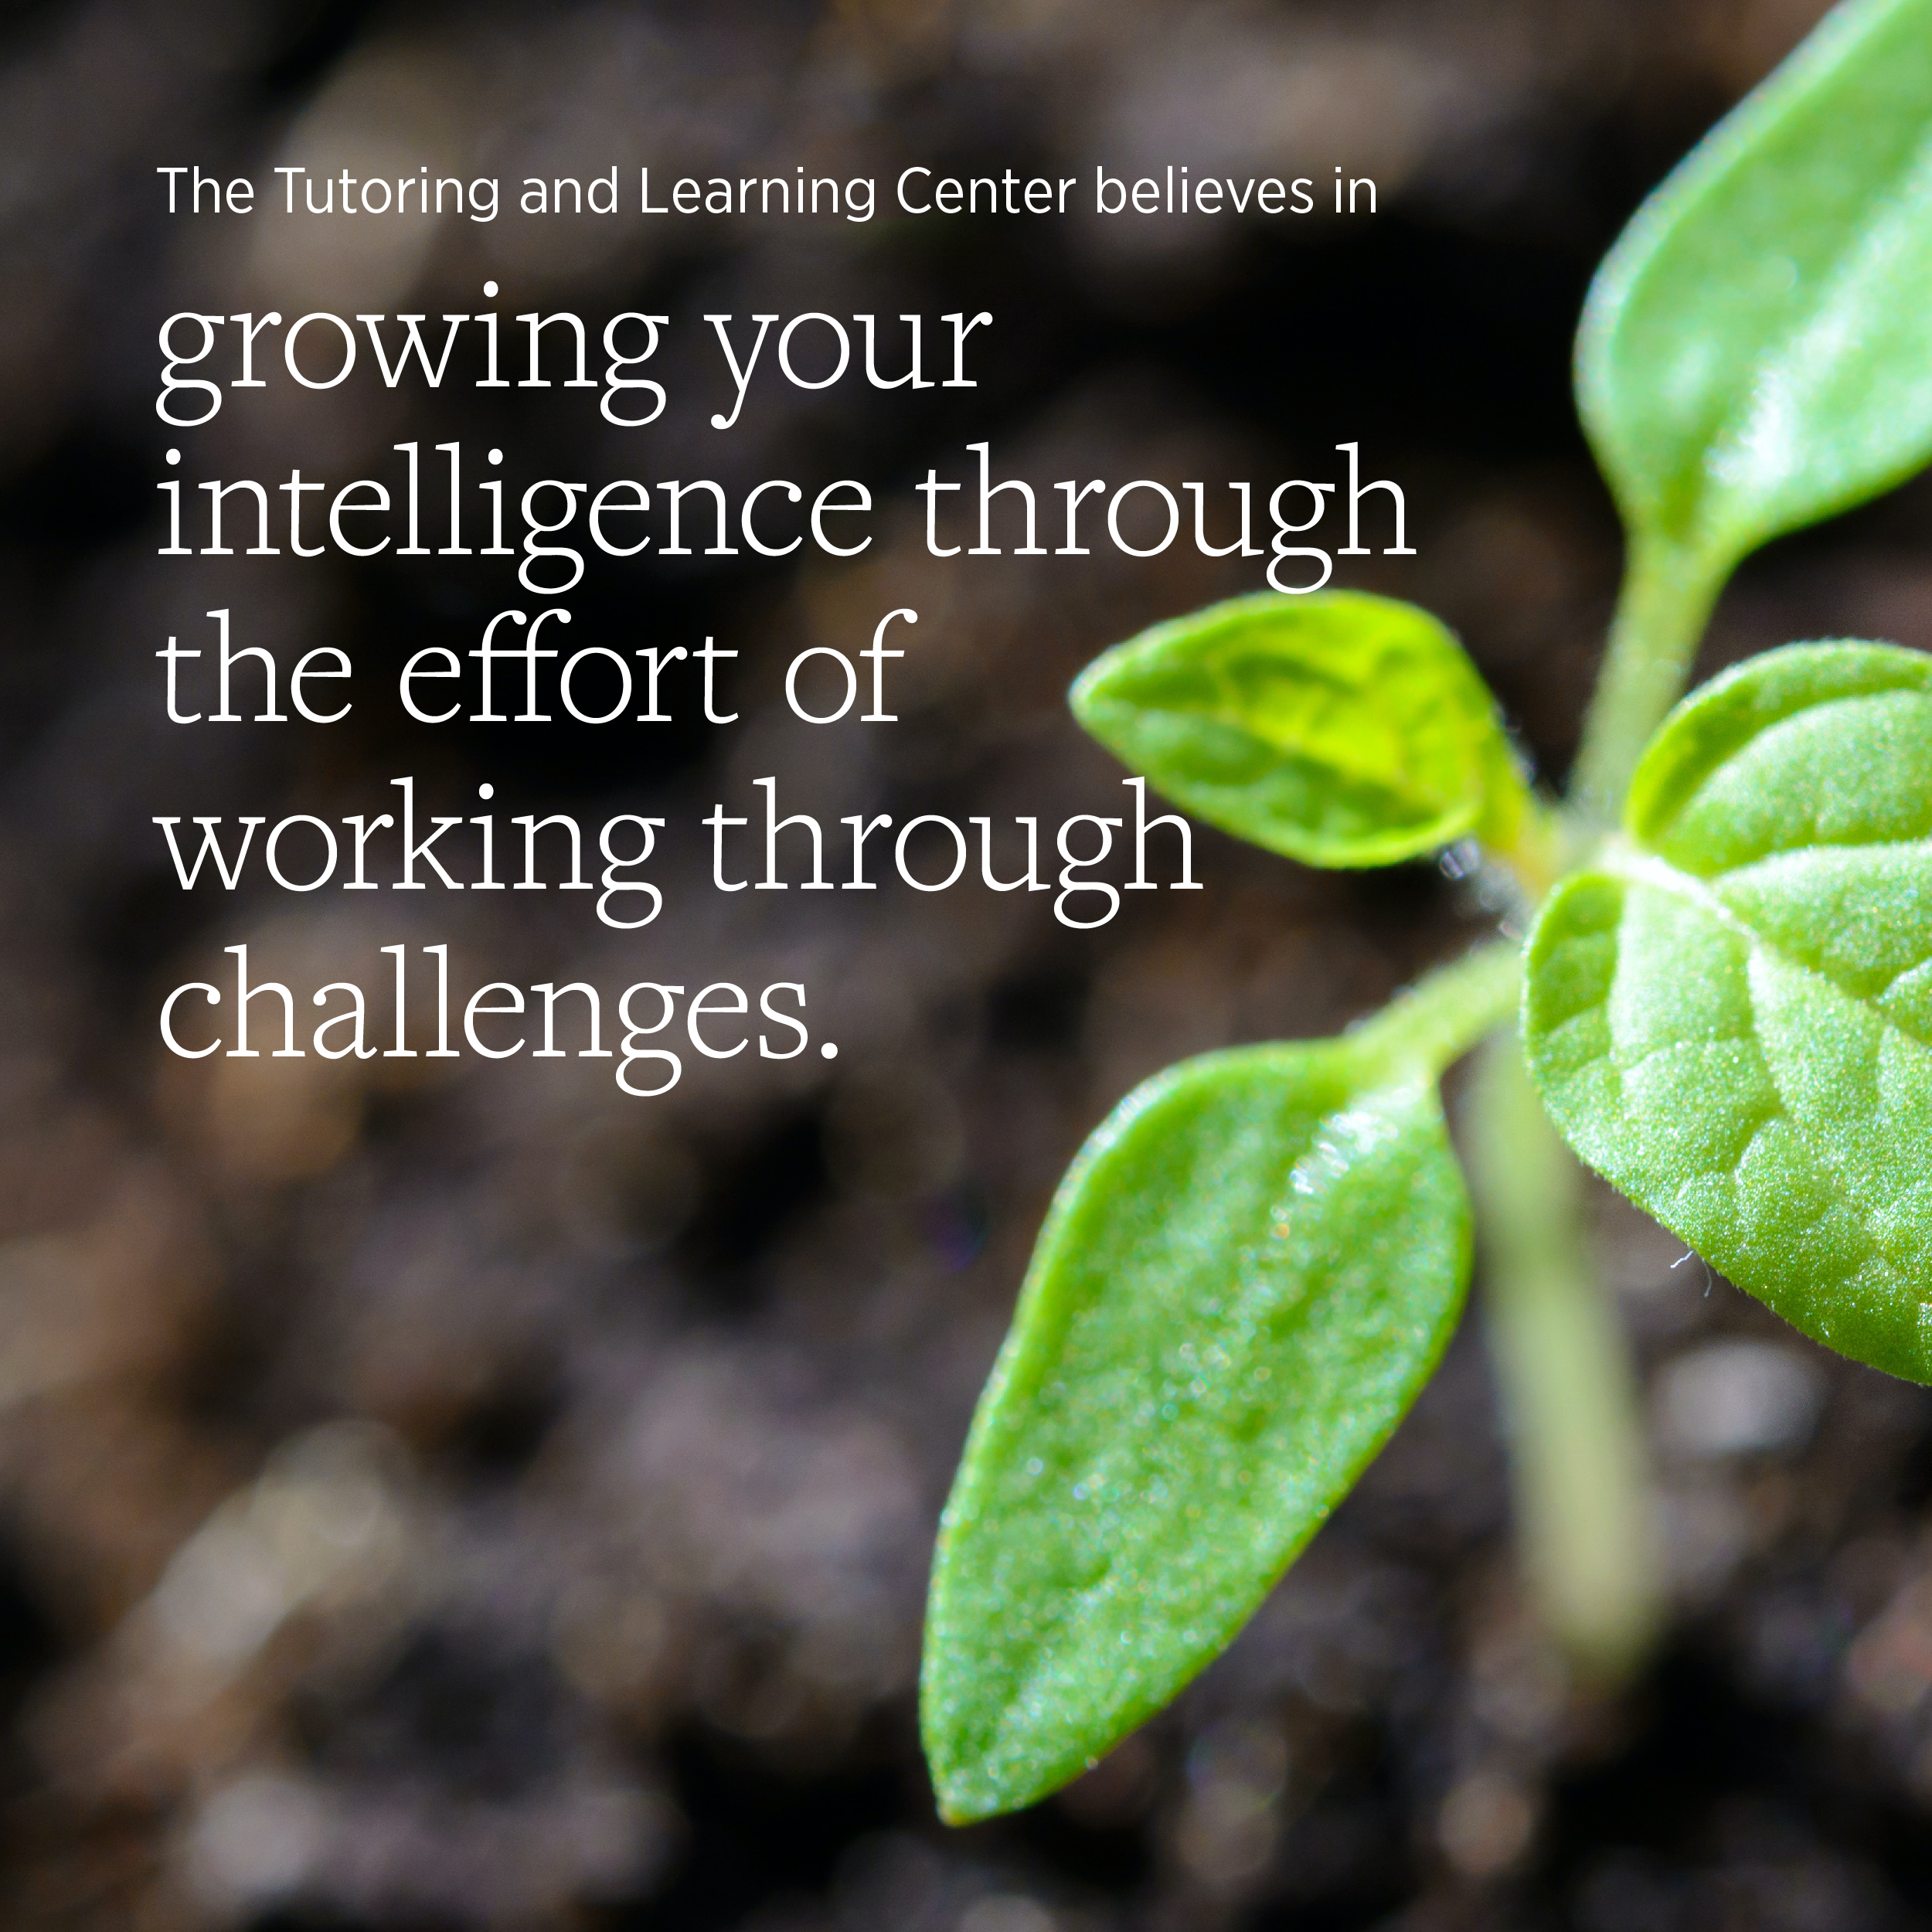 The Tutoring and Learning Center believes in growing your intelligence through the effort of working through challenges.